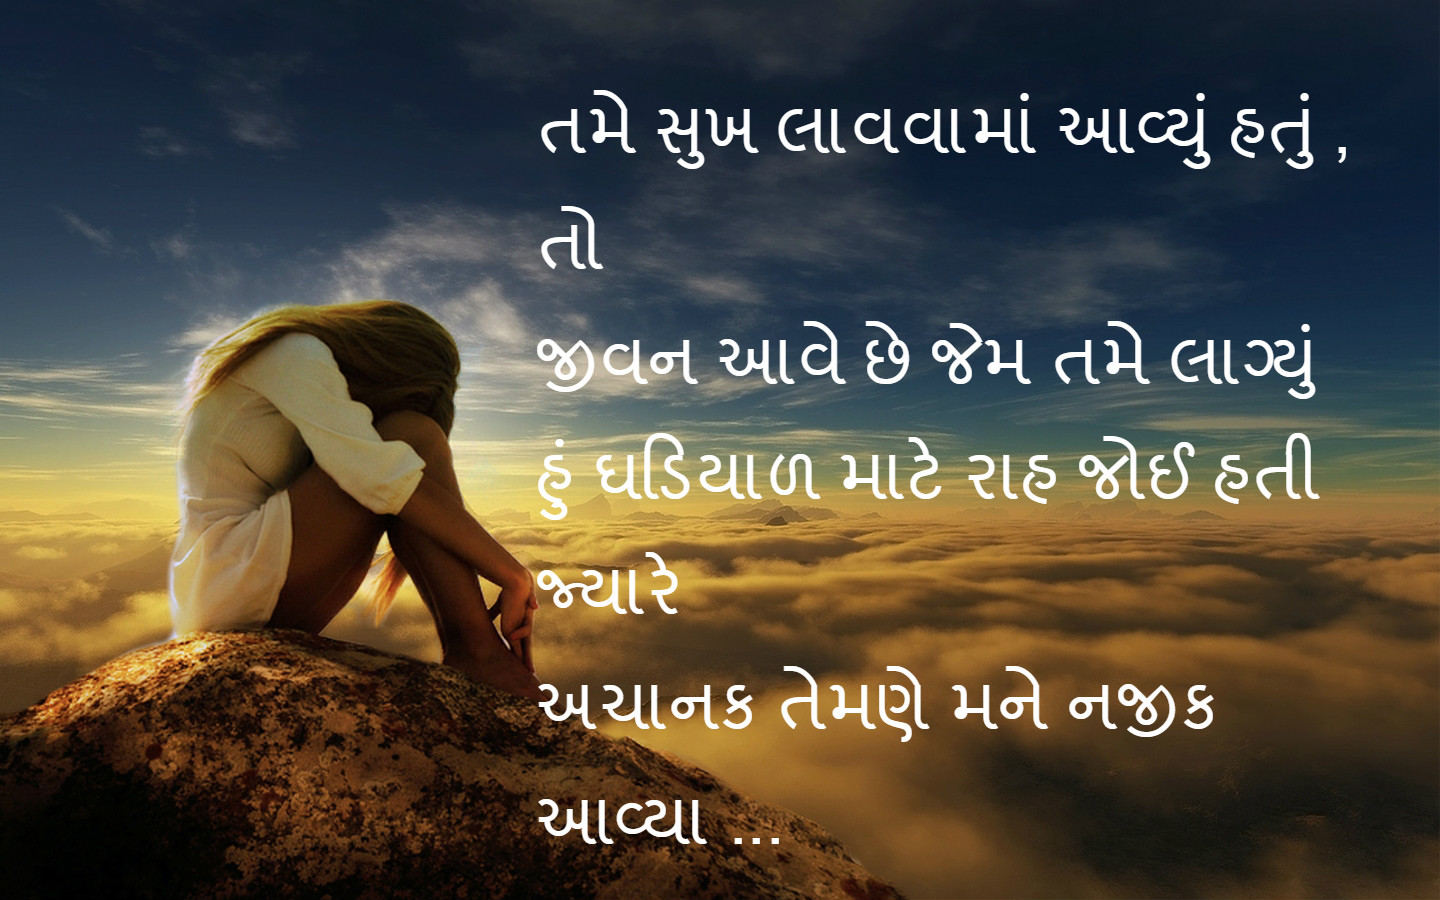 gujarati love quotes with images.